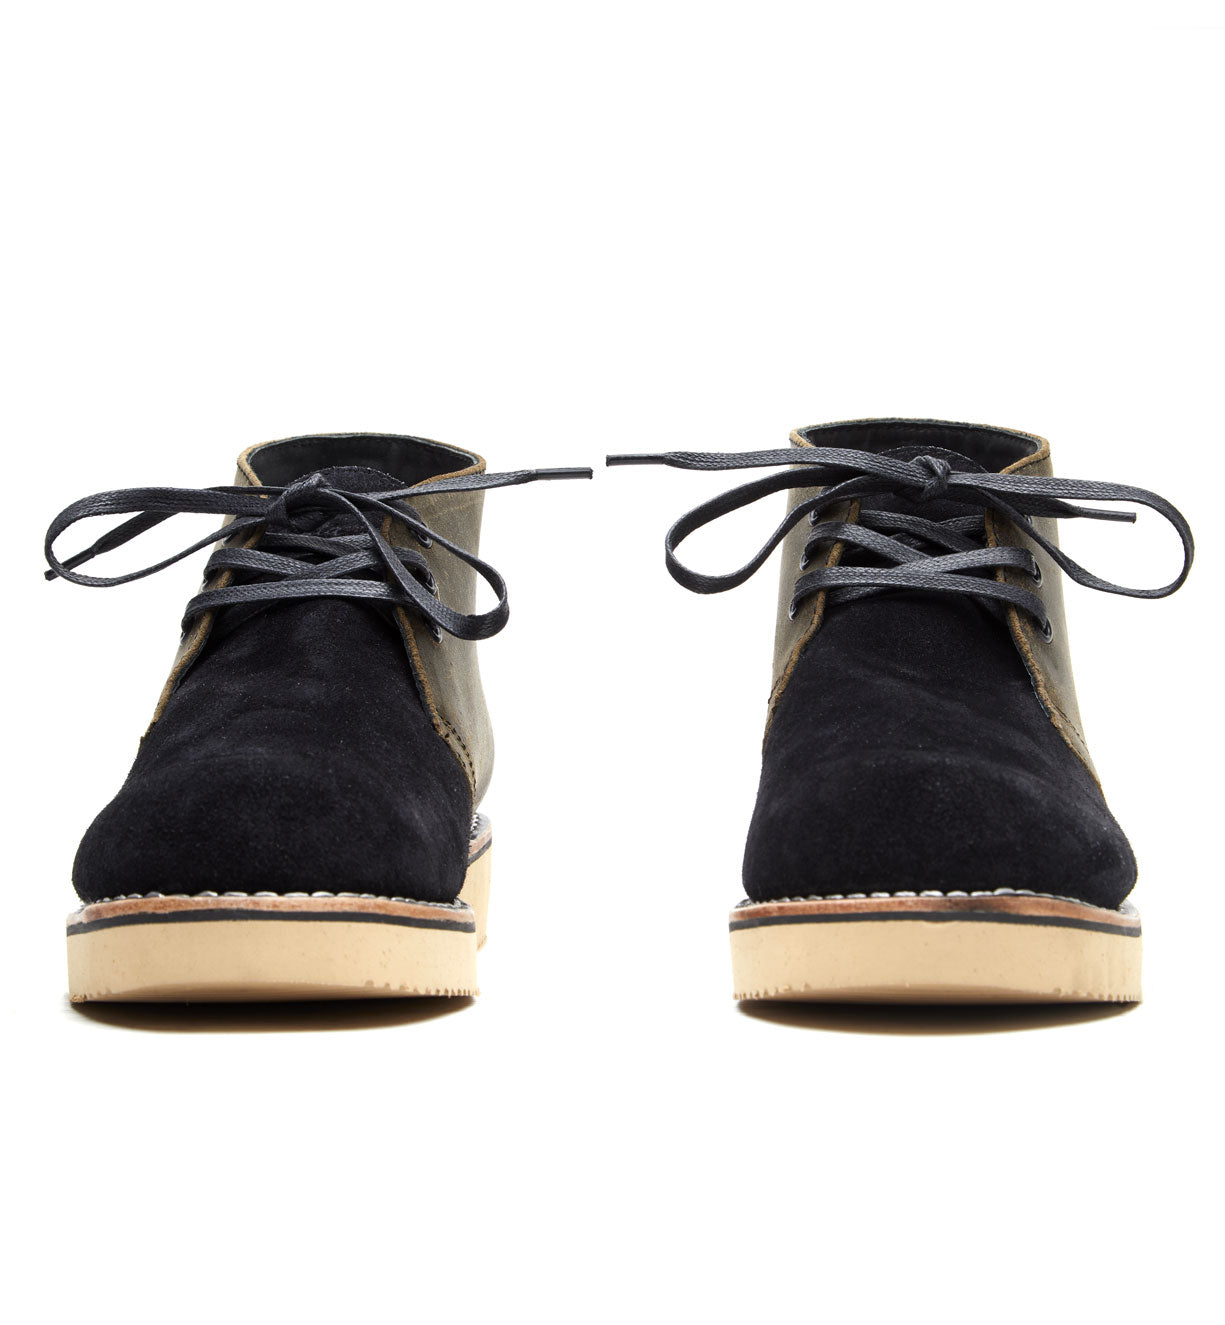 A pair of black suede Santa Rosa Brand Union Cognac Bison Boots with laces on a white background, featuring a Vibram 2021 wedge outsole.